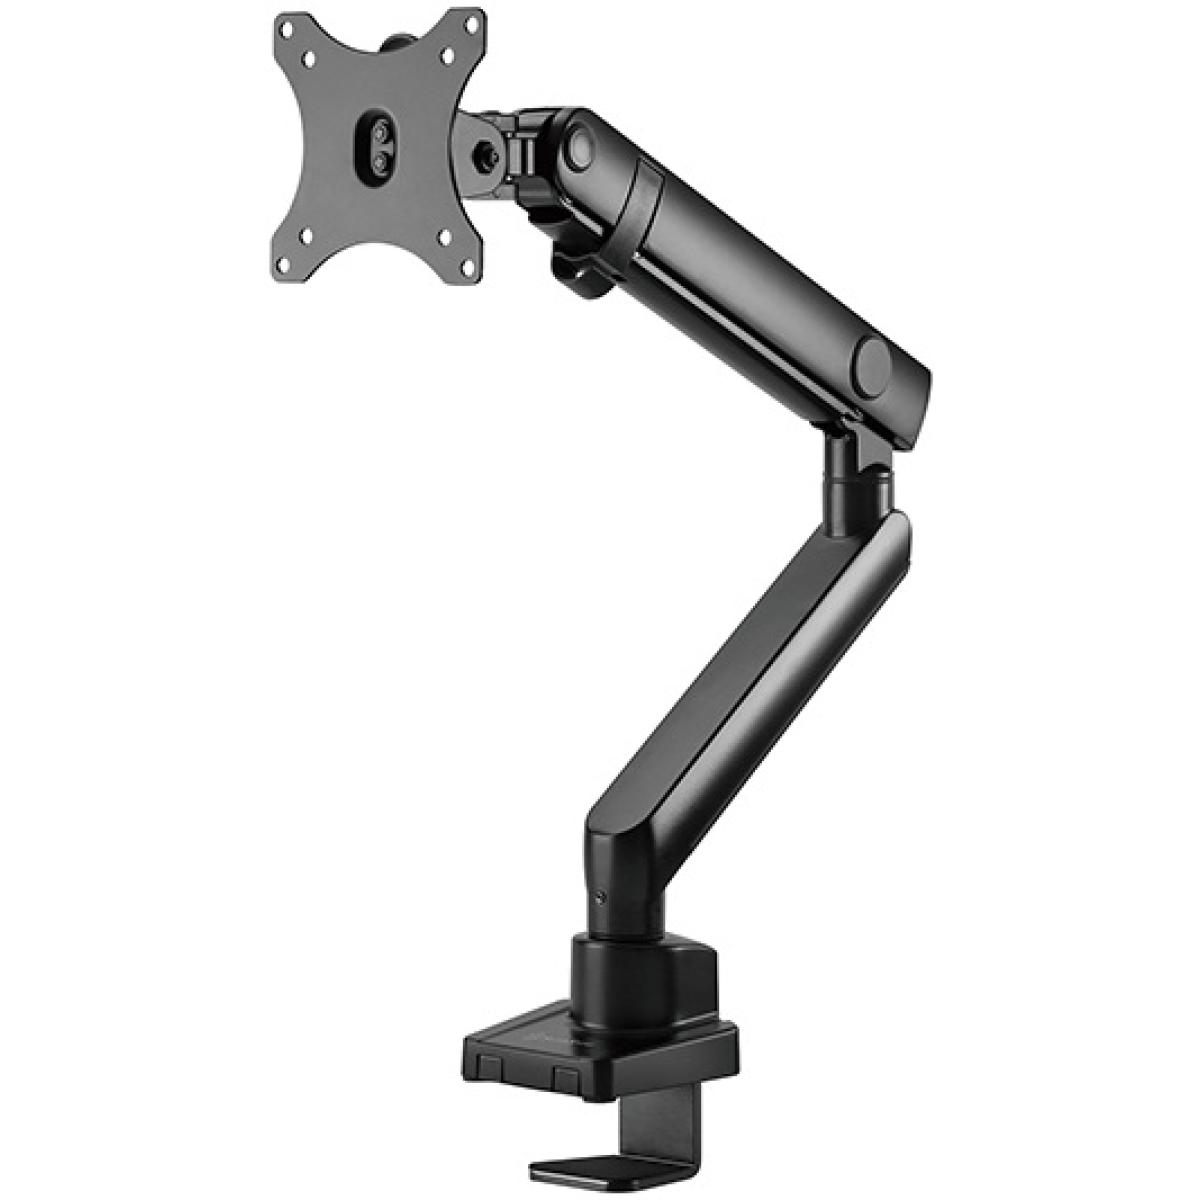 SilverStone ARM13 (Black) Single Monitor Arm w/ Mechanical Spring Design & Versatile Adjustability, For Monitors Up To 32